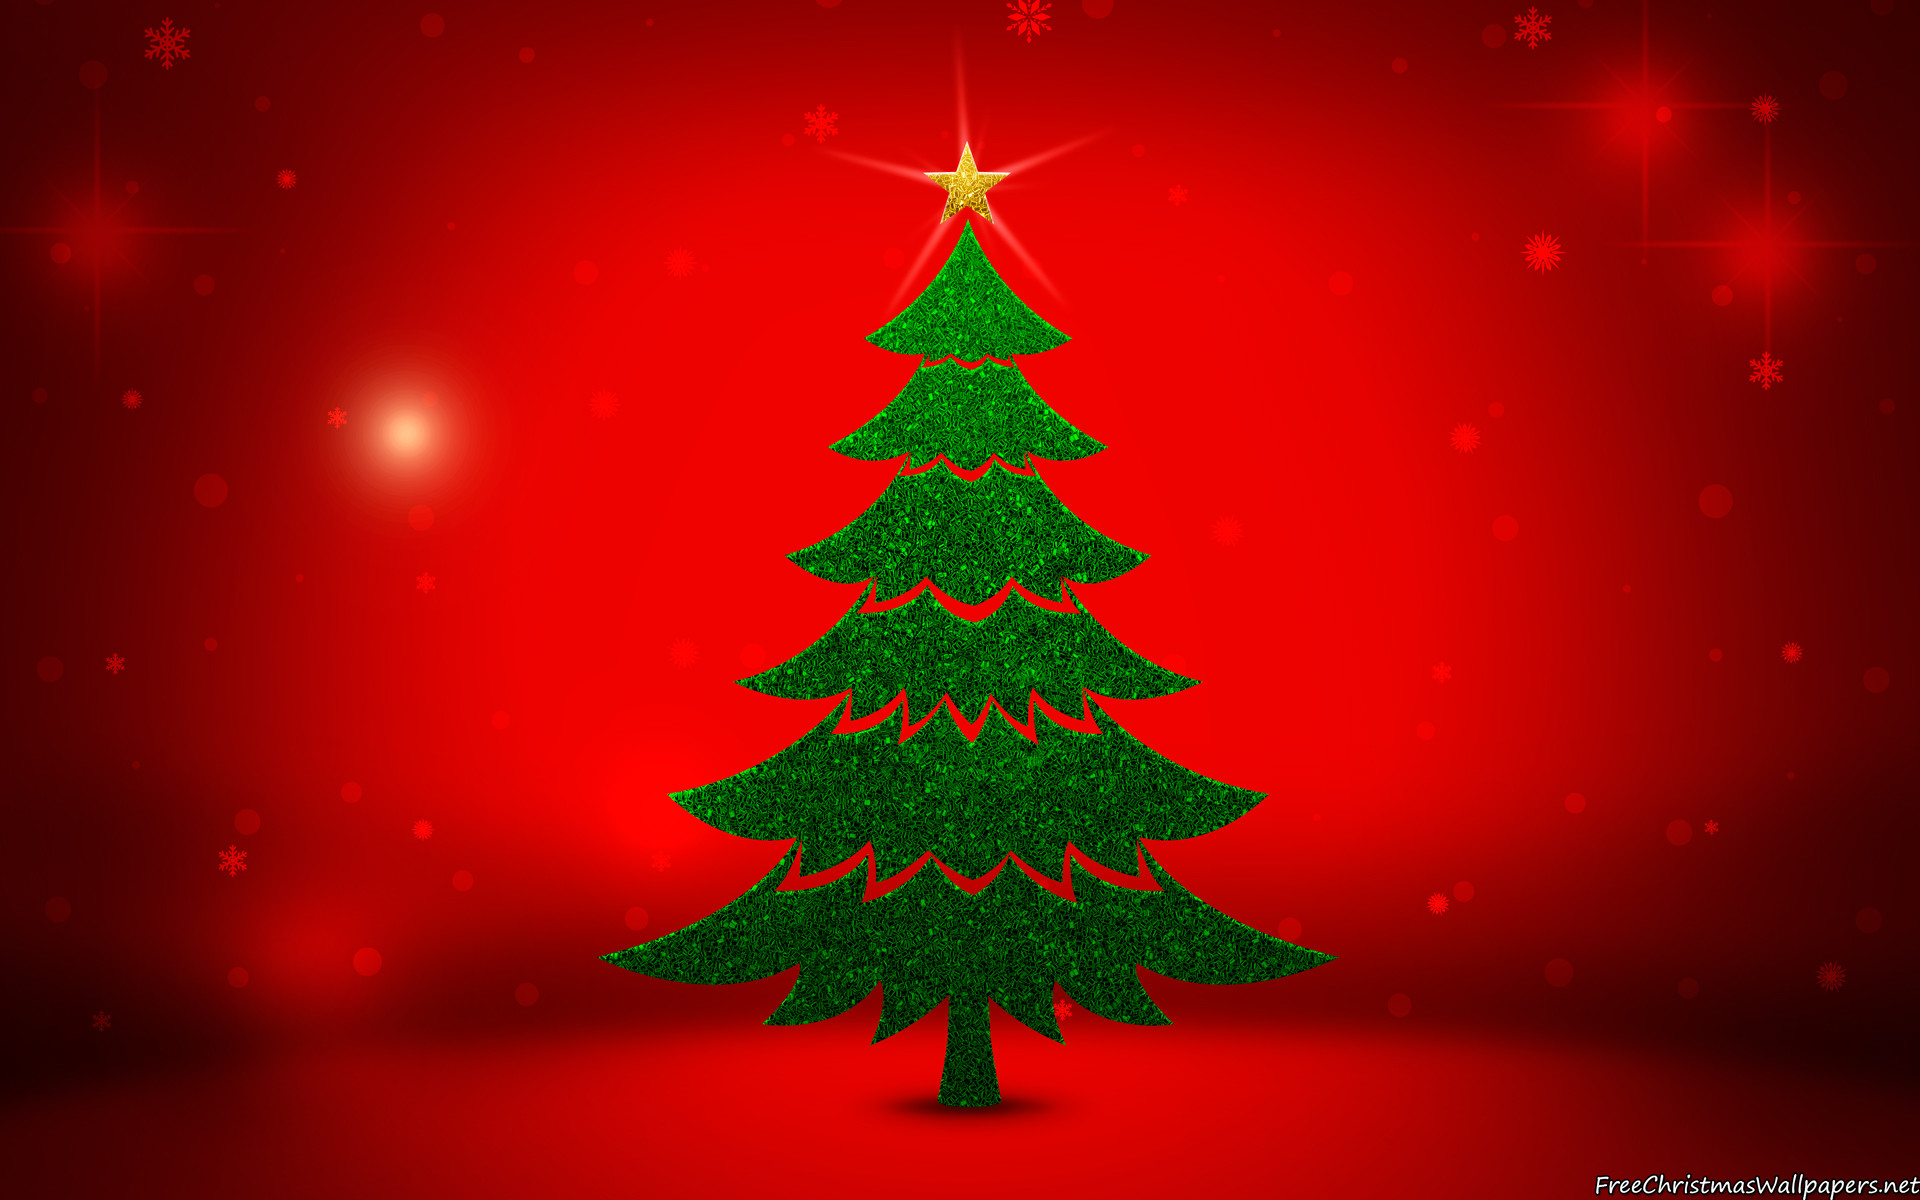 1920x1200 green christmas tree wallpaper. widescreen hd red background